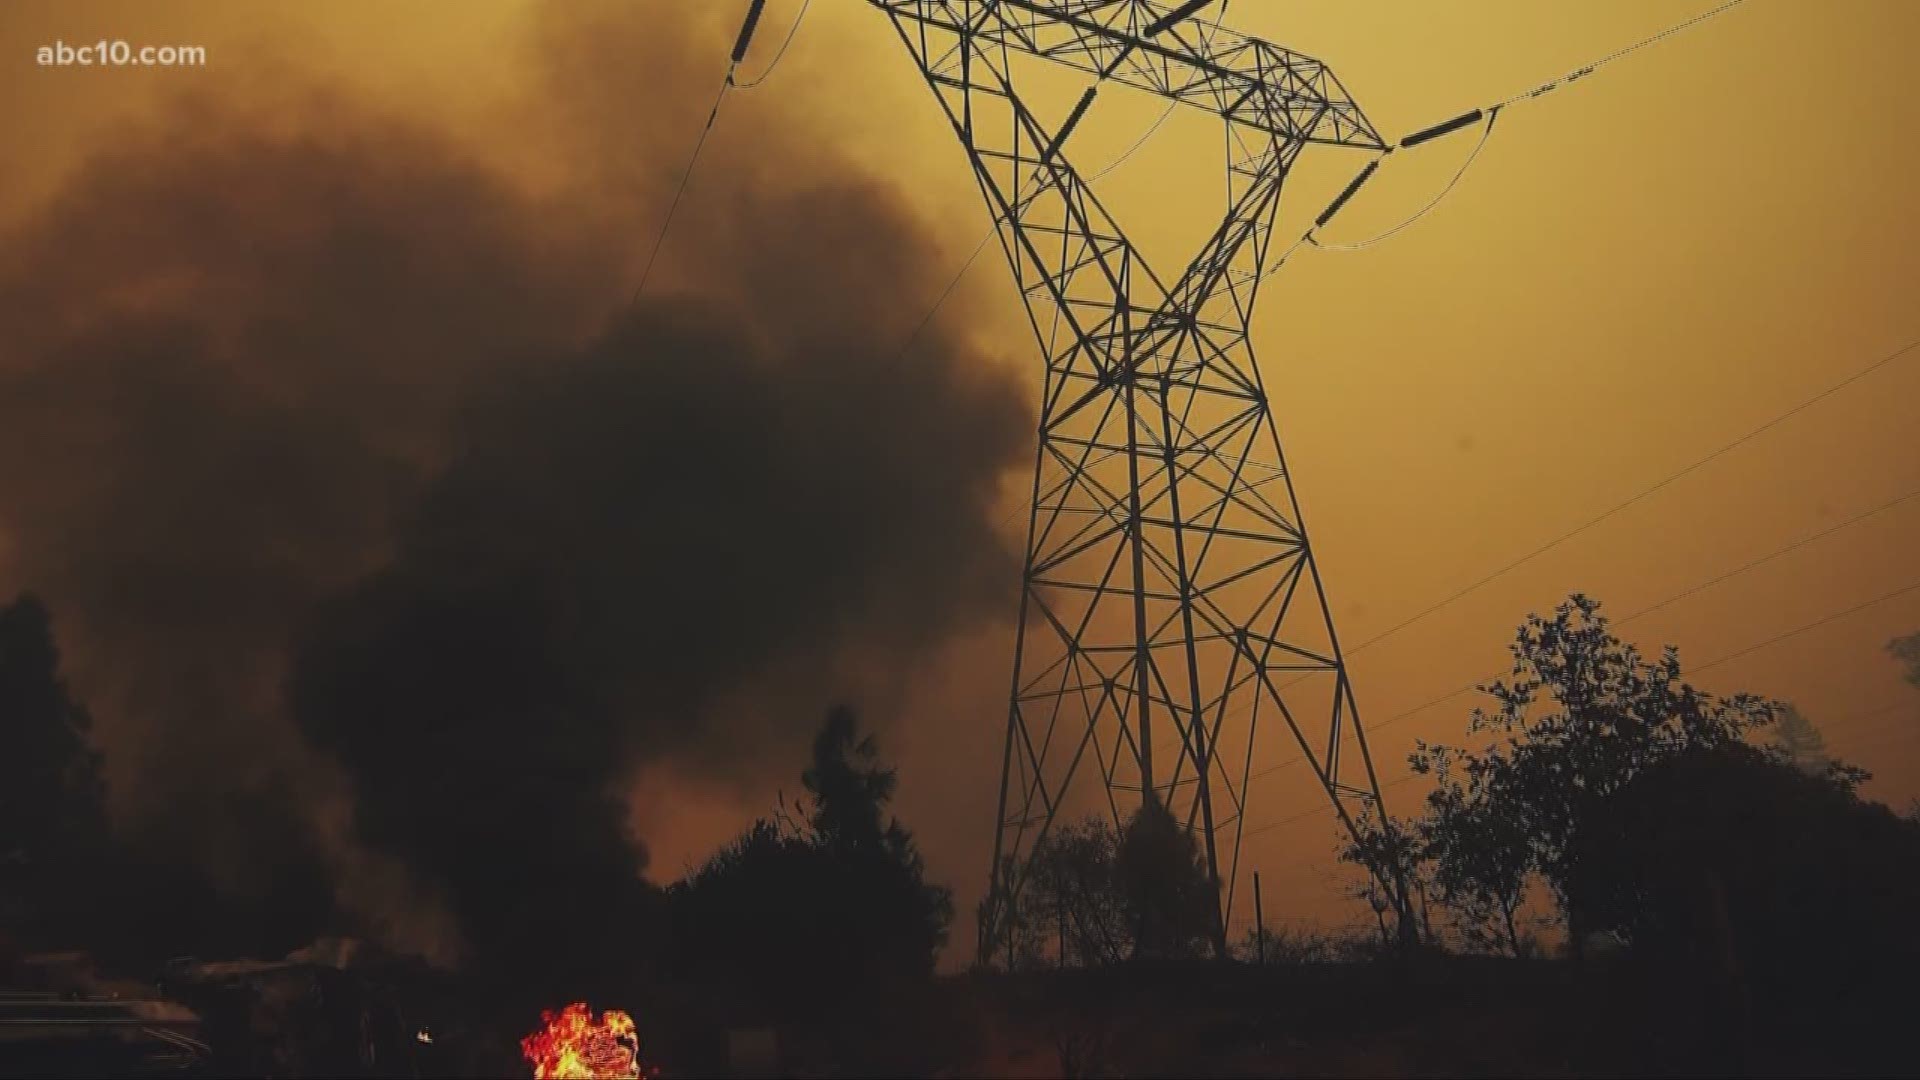 With the cause of California's deadliest-ever wildfire still officially under investigation, some of the evacuees are already joining a lawsuit against power company Pacific Gas & Electric (PG&E).